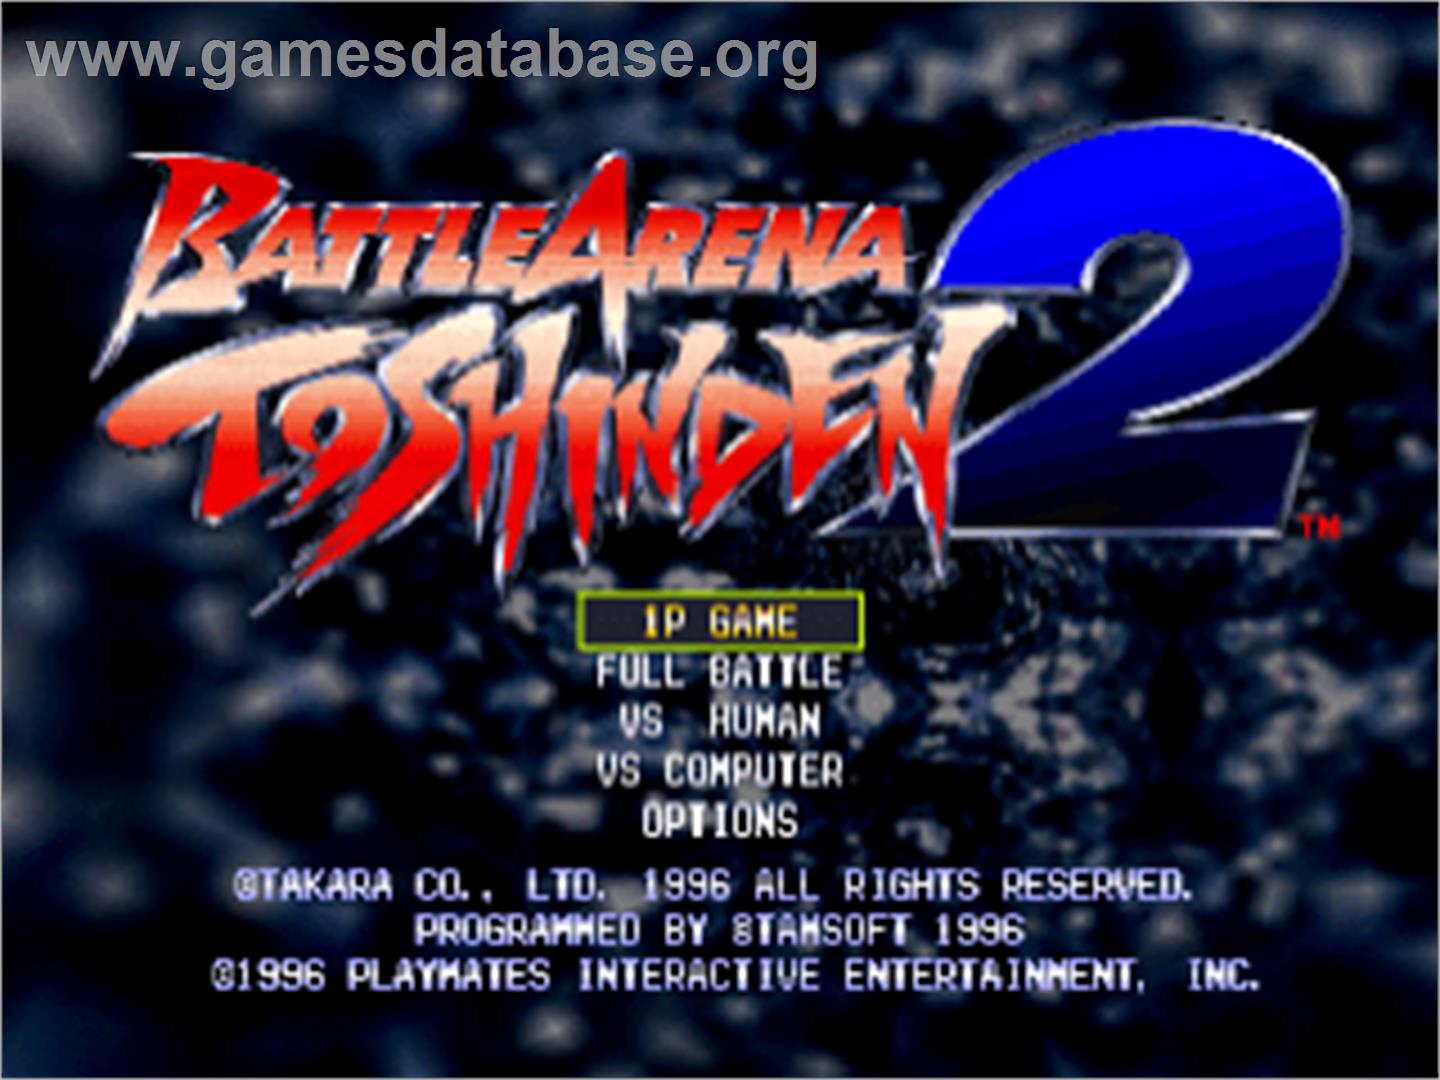 Battle Arena Toshinden 2 - Sony Playstation - Artwork - Title Screen